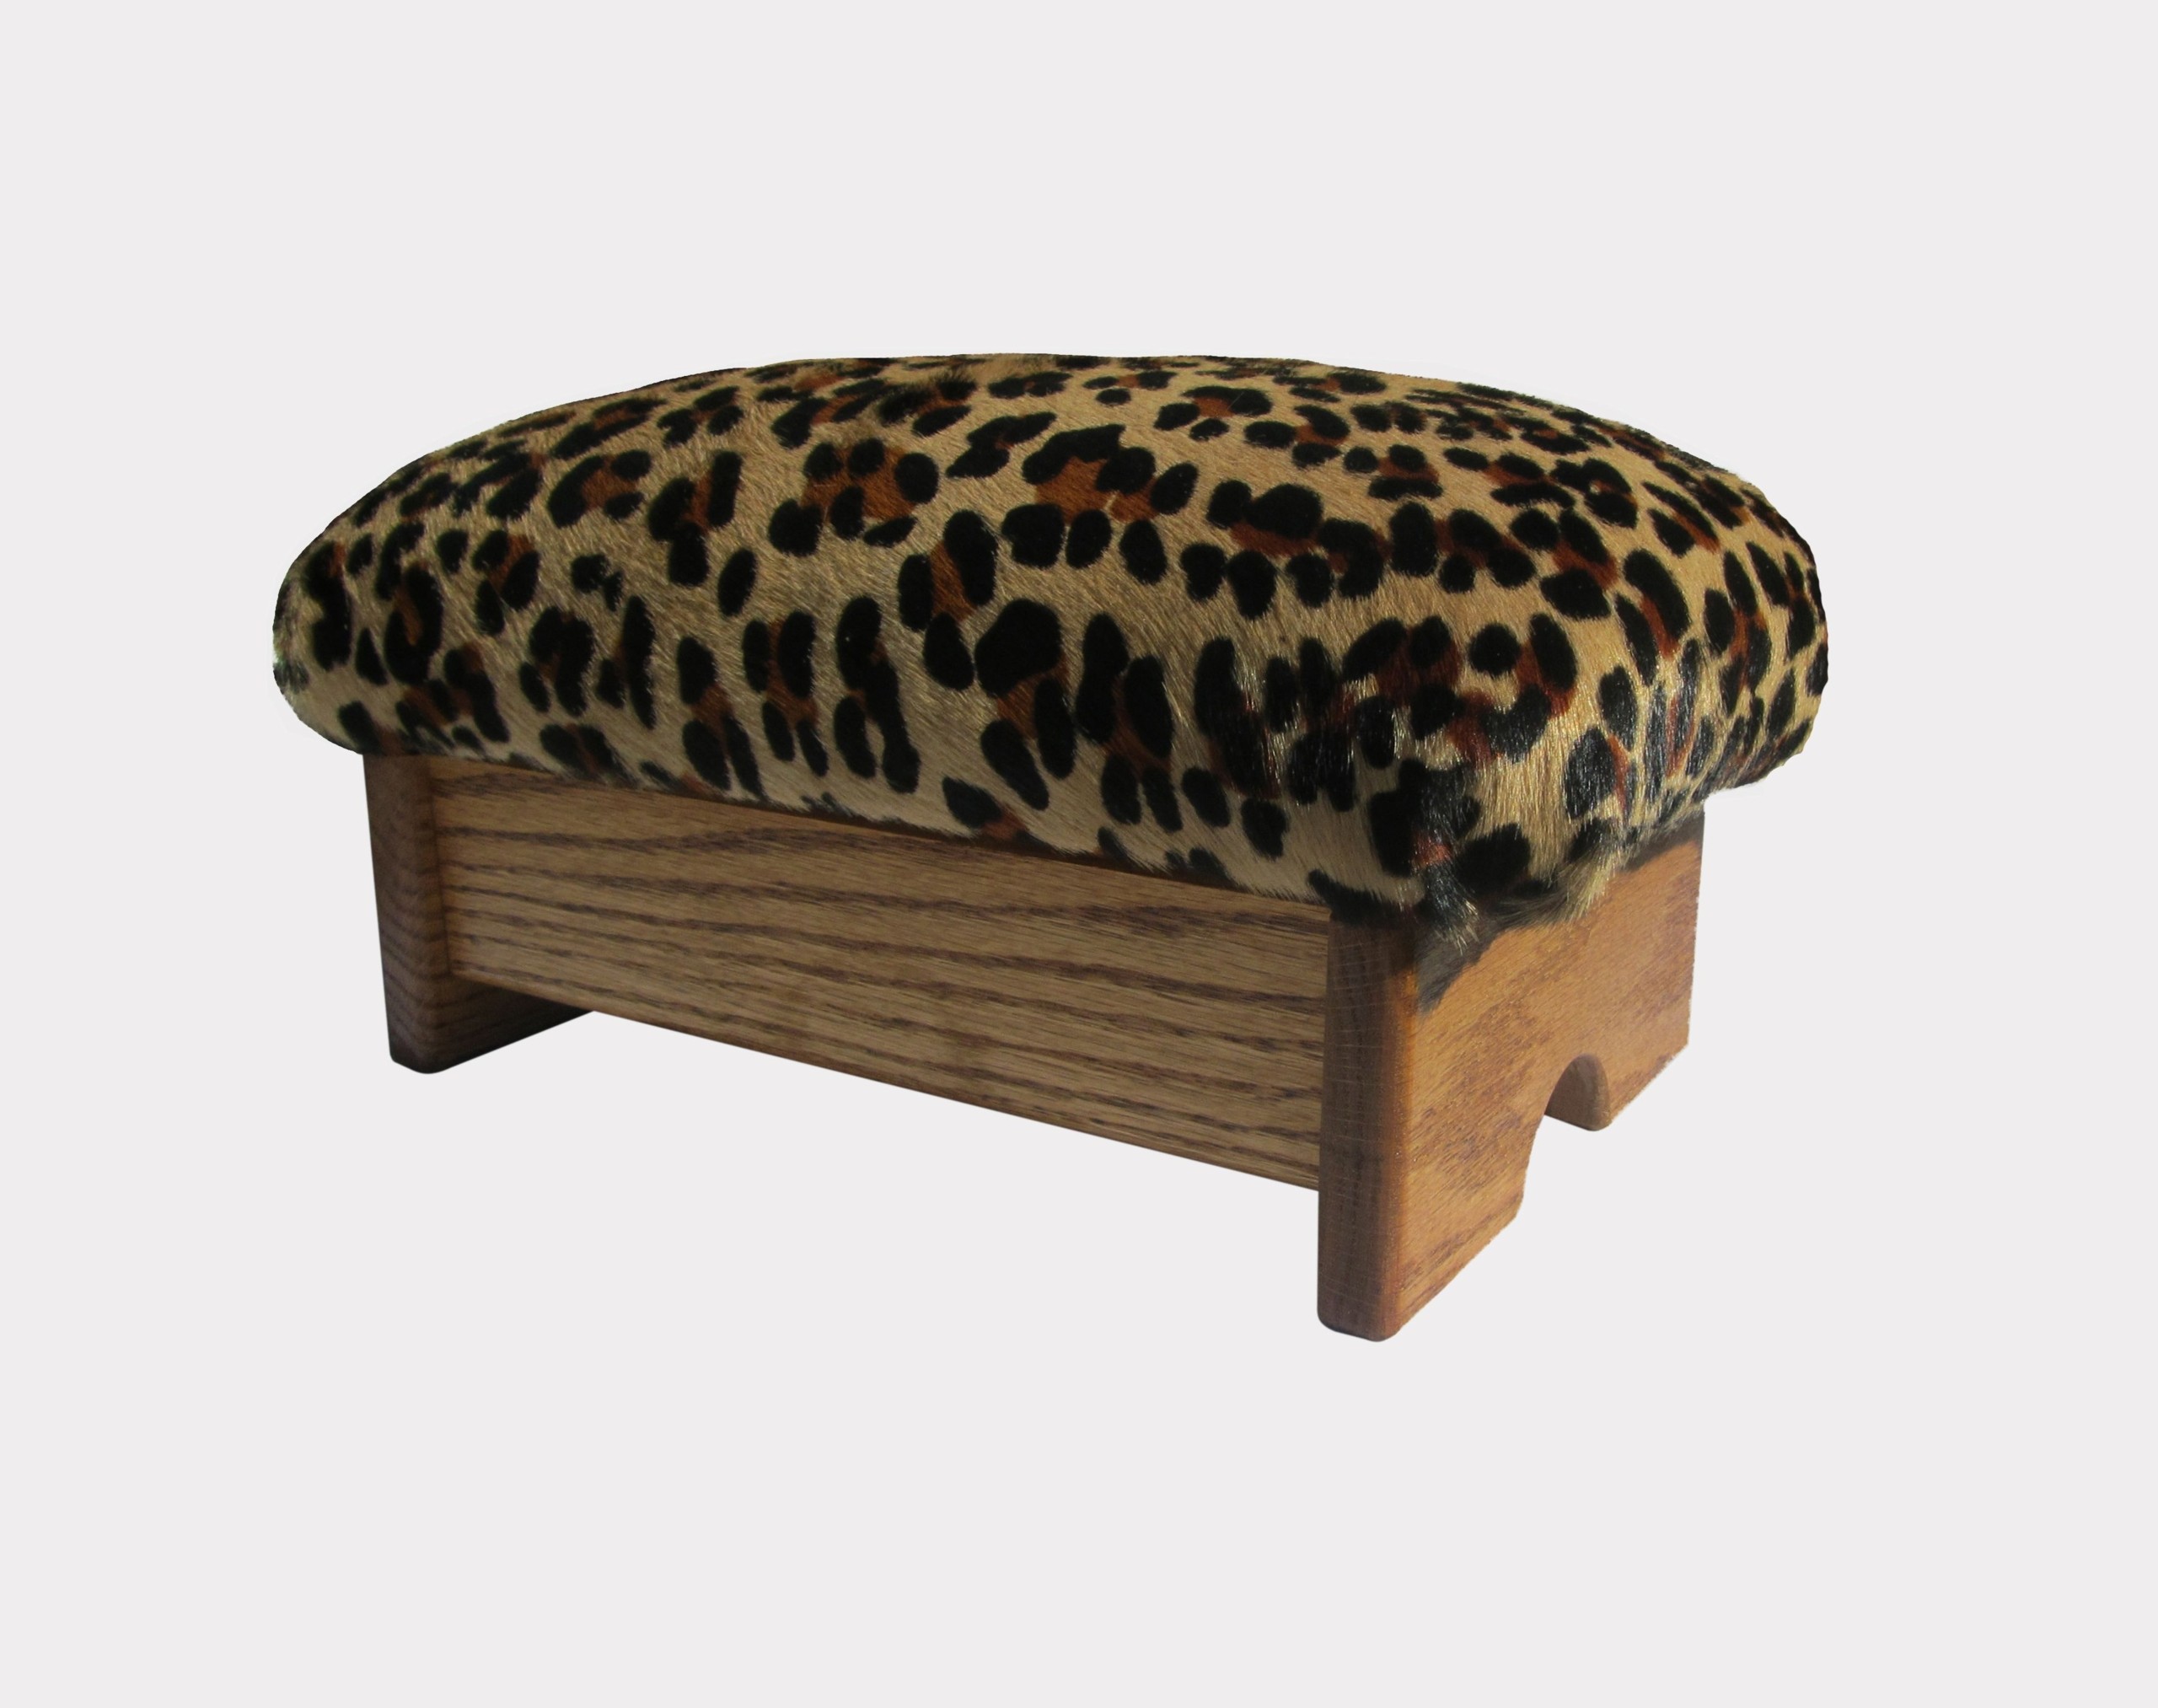 Padded Foot Stool Cheetah 7" Tall Maple Stain (Made in the USA)